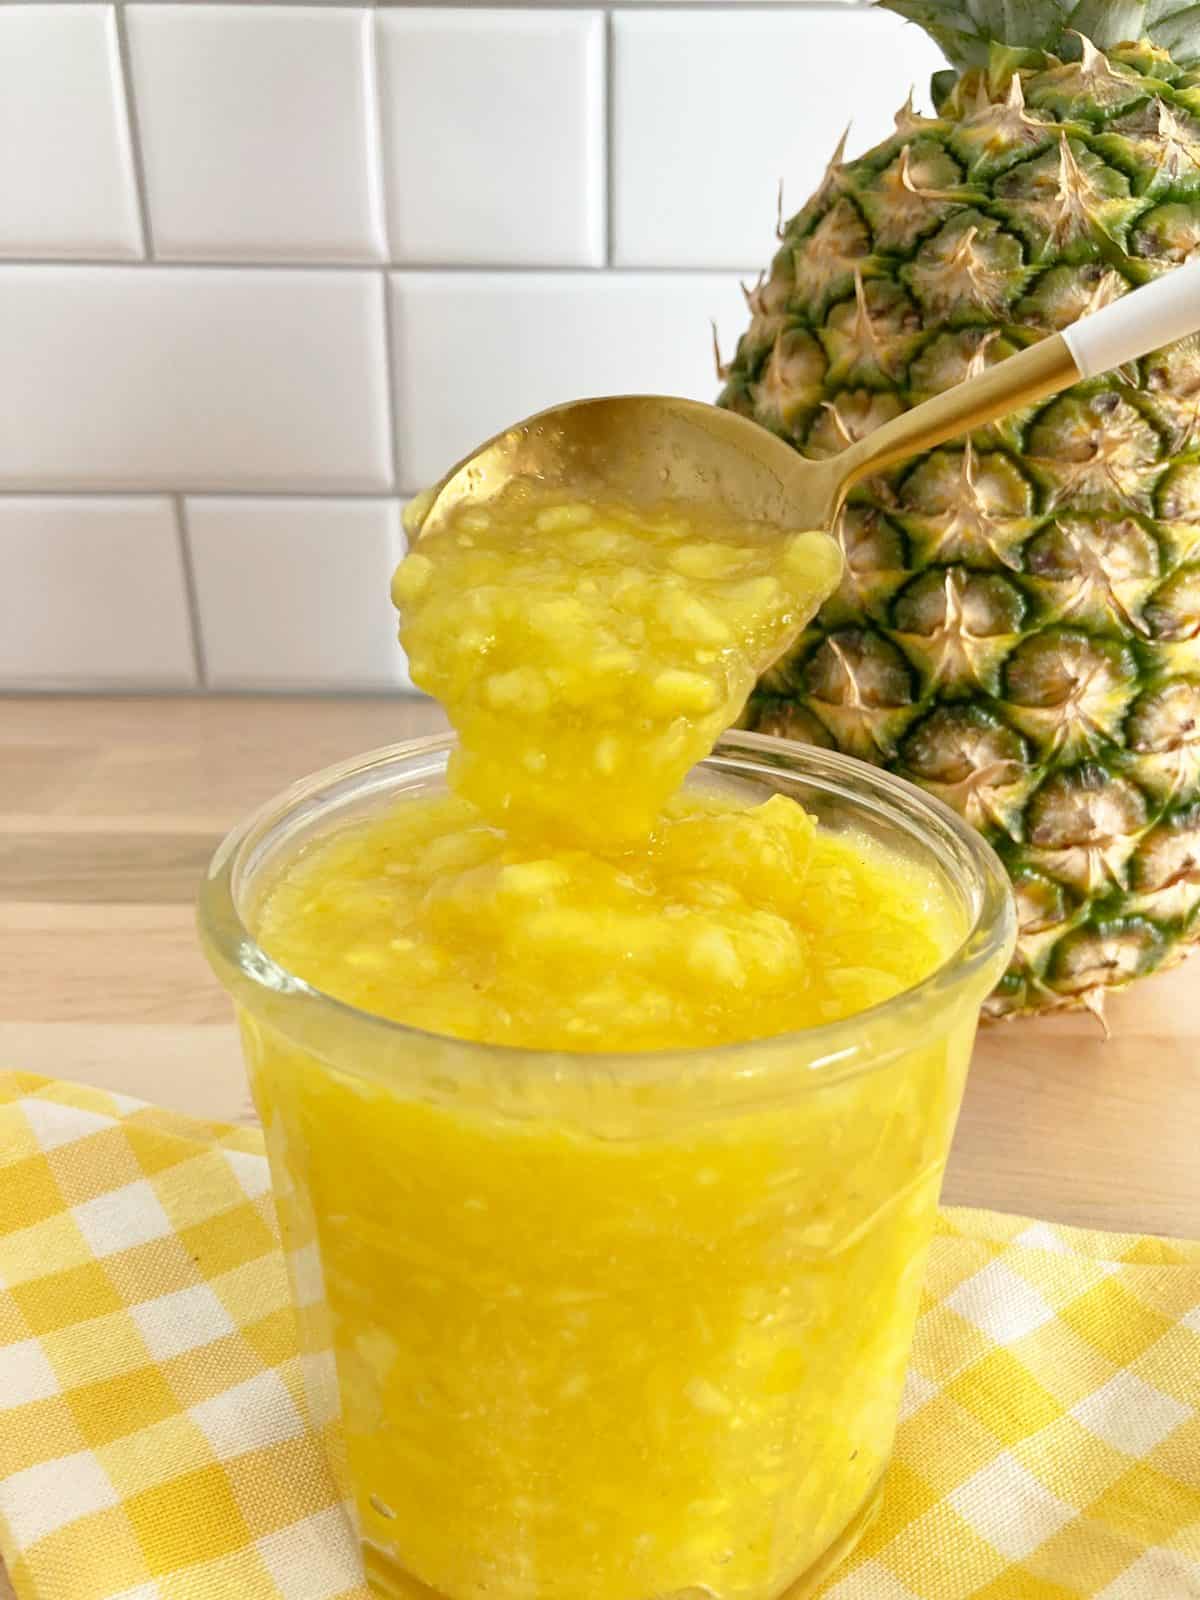 Glass jar filled with pineapple topping and a gold spoon showing the texture. Behind is a whole fresh pineapple.